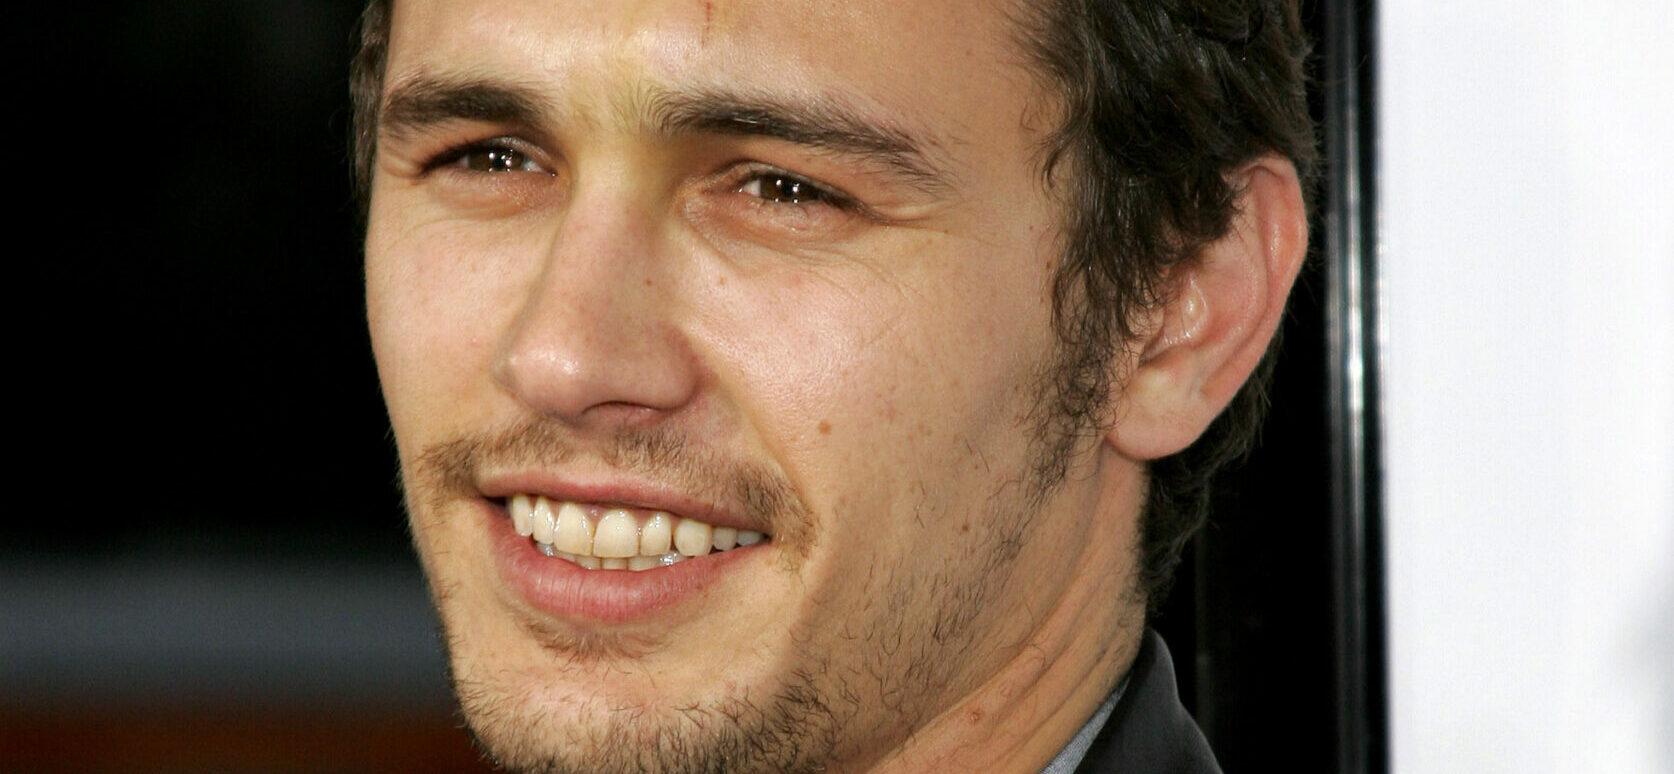 James Franco at the Los Angeles Premiere of "Knocked Up"